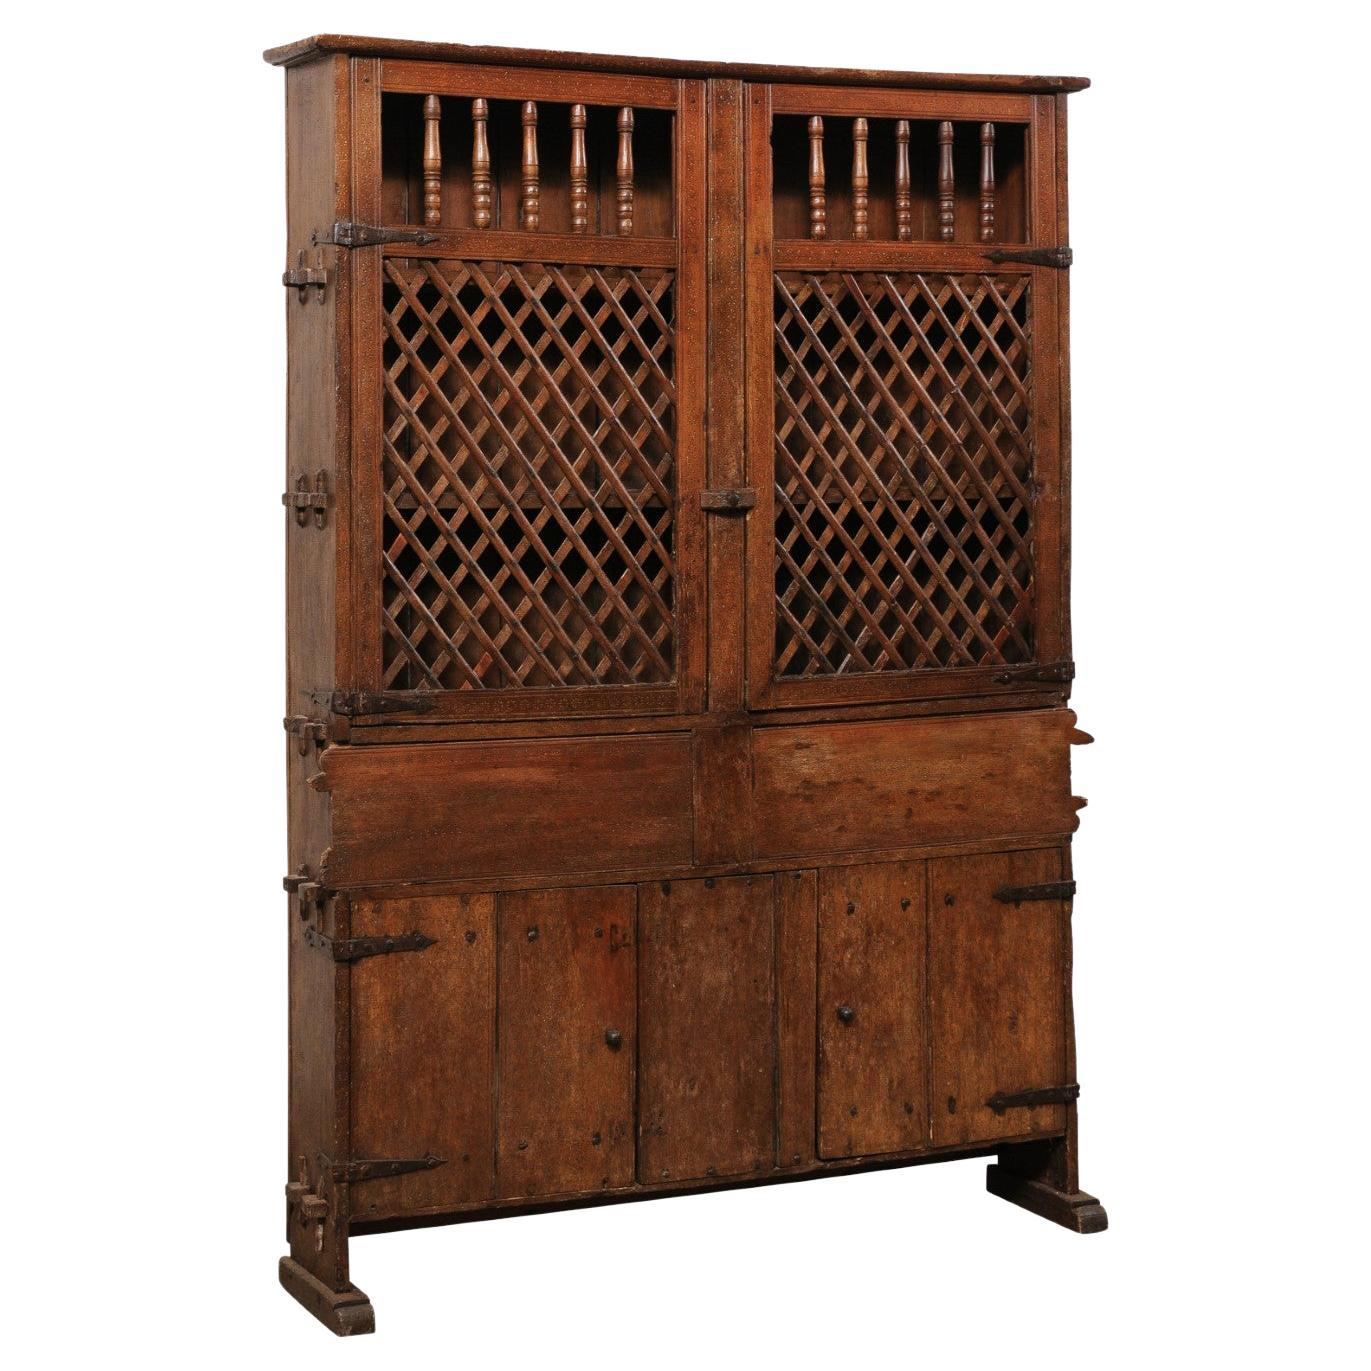 Tall Early 18th C. Italian Wooden Storage & Display Cabinet, a Fabulous Piece